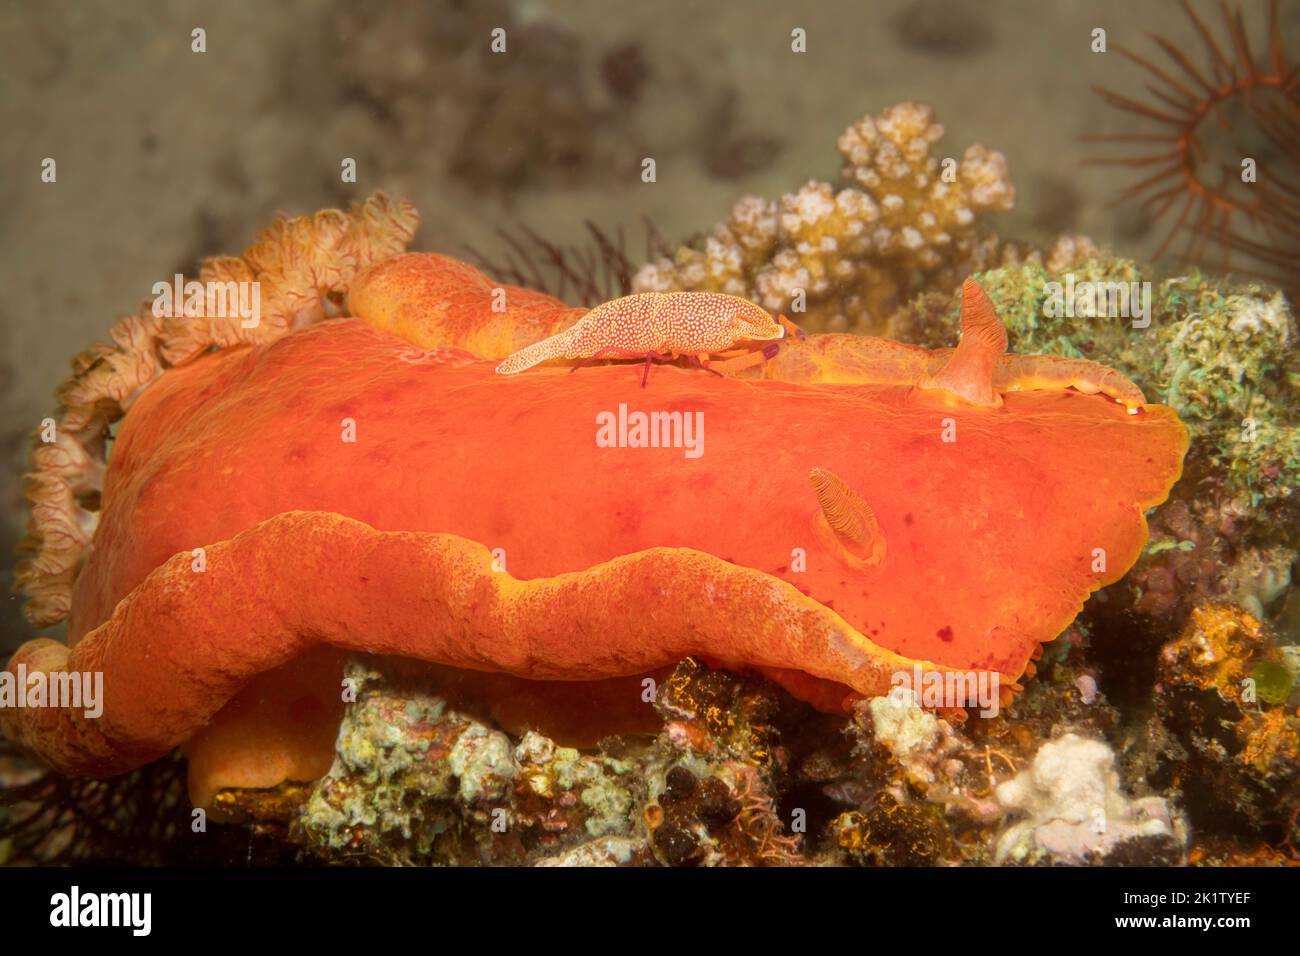 An imperial commensal shrimp, Periclimenes imperator, photographed at night on the spanish dancer nudibranch, Hexabranchus sanguineus, that it calls h Stock Photo